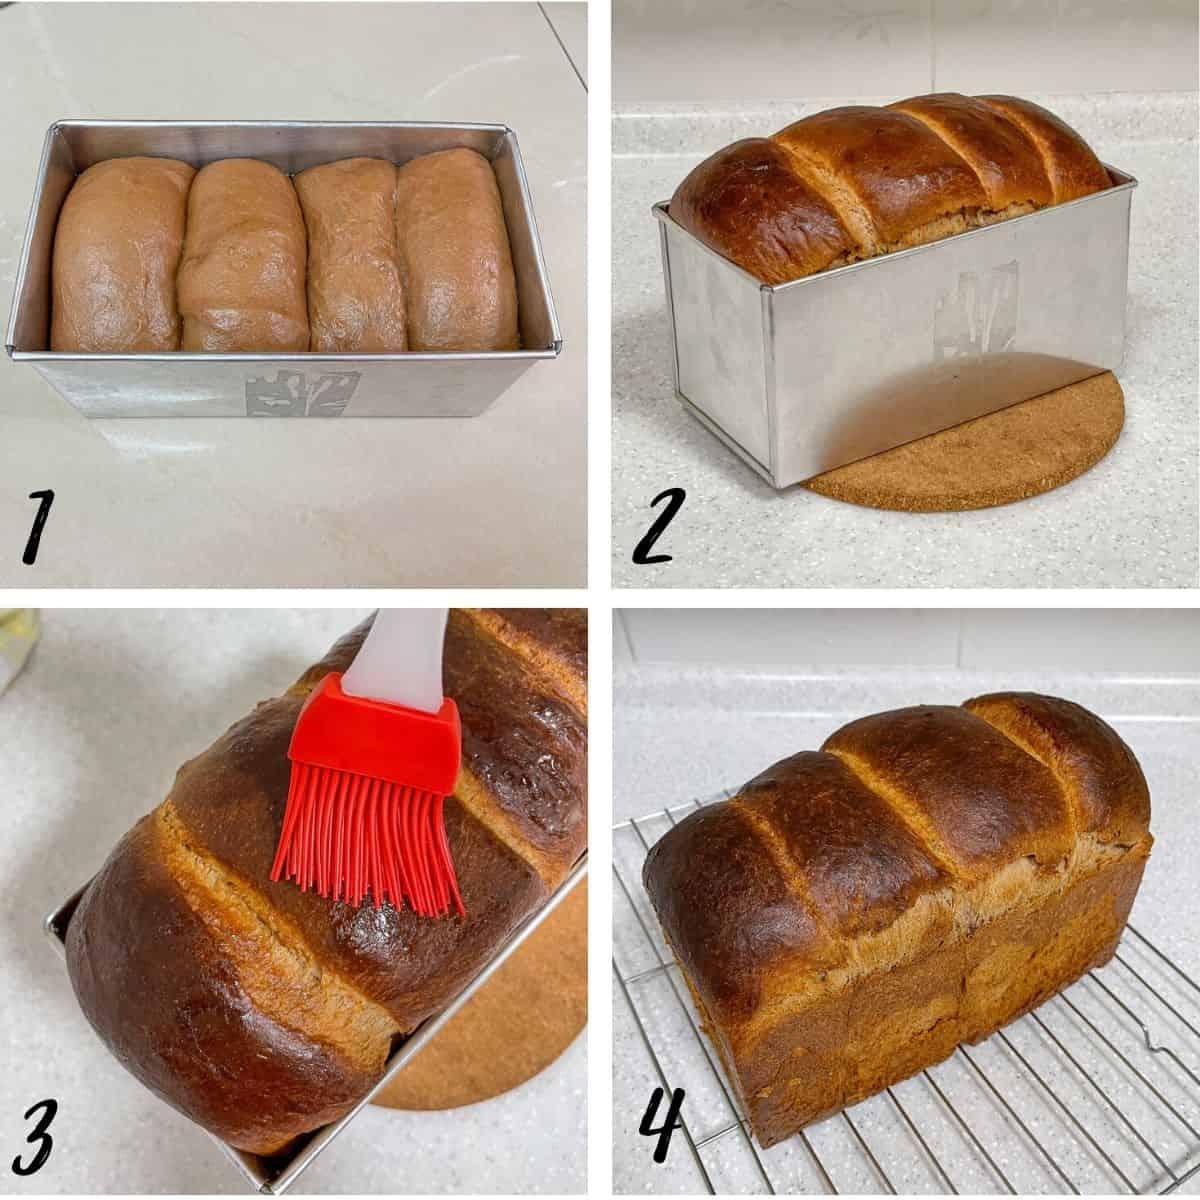 A poster of 4 images showing proofed chocolate brioche bread in a bread tin and a baked brioche loaf on a wire rack